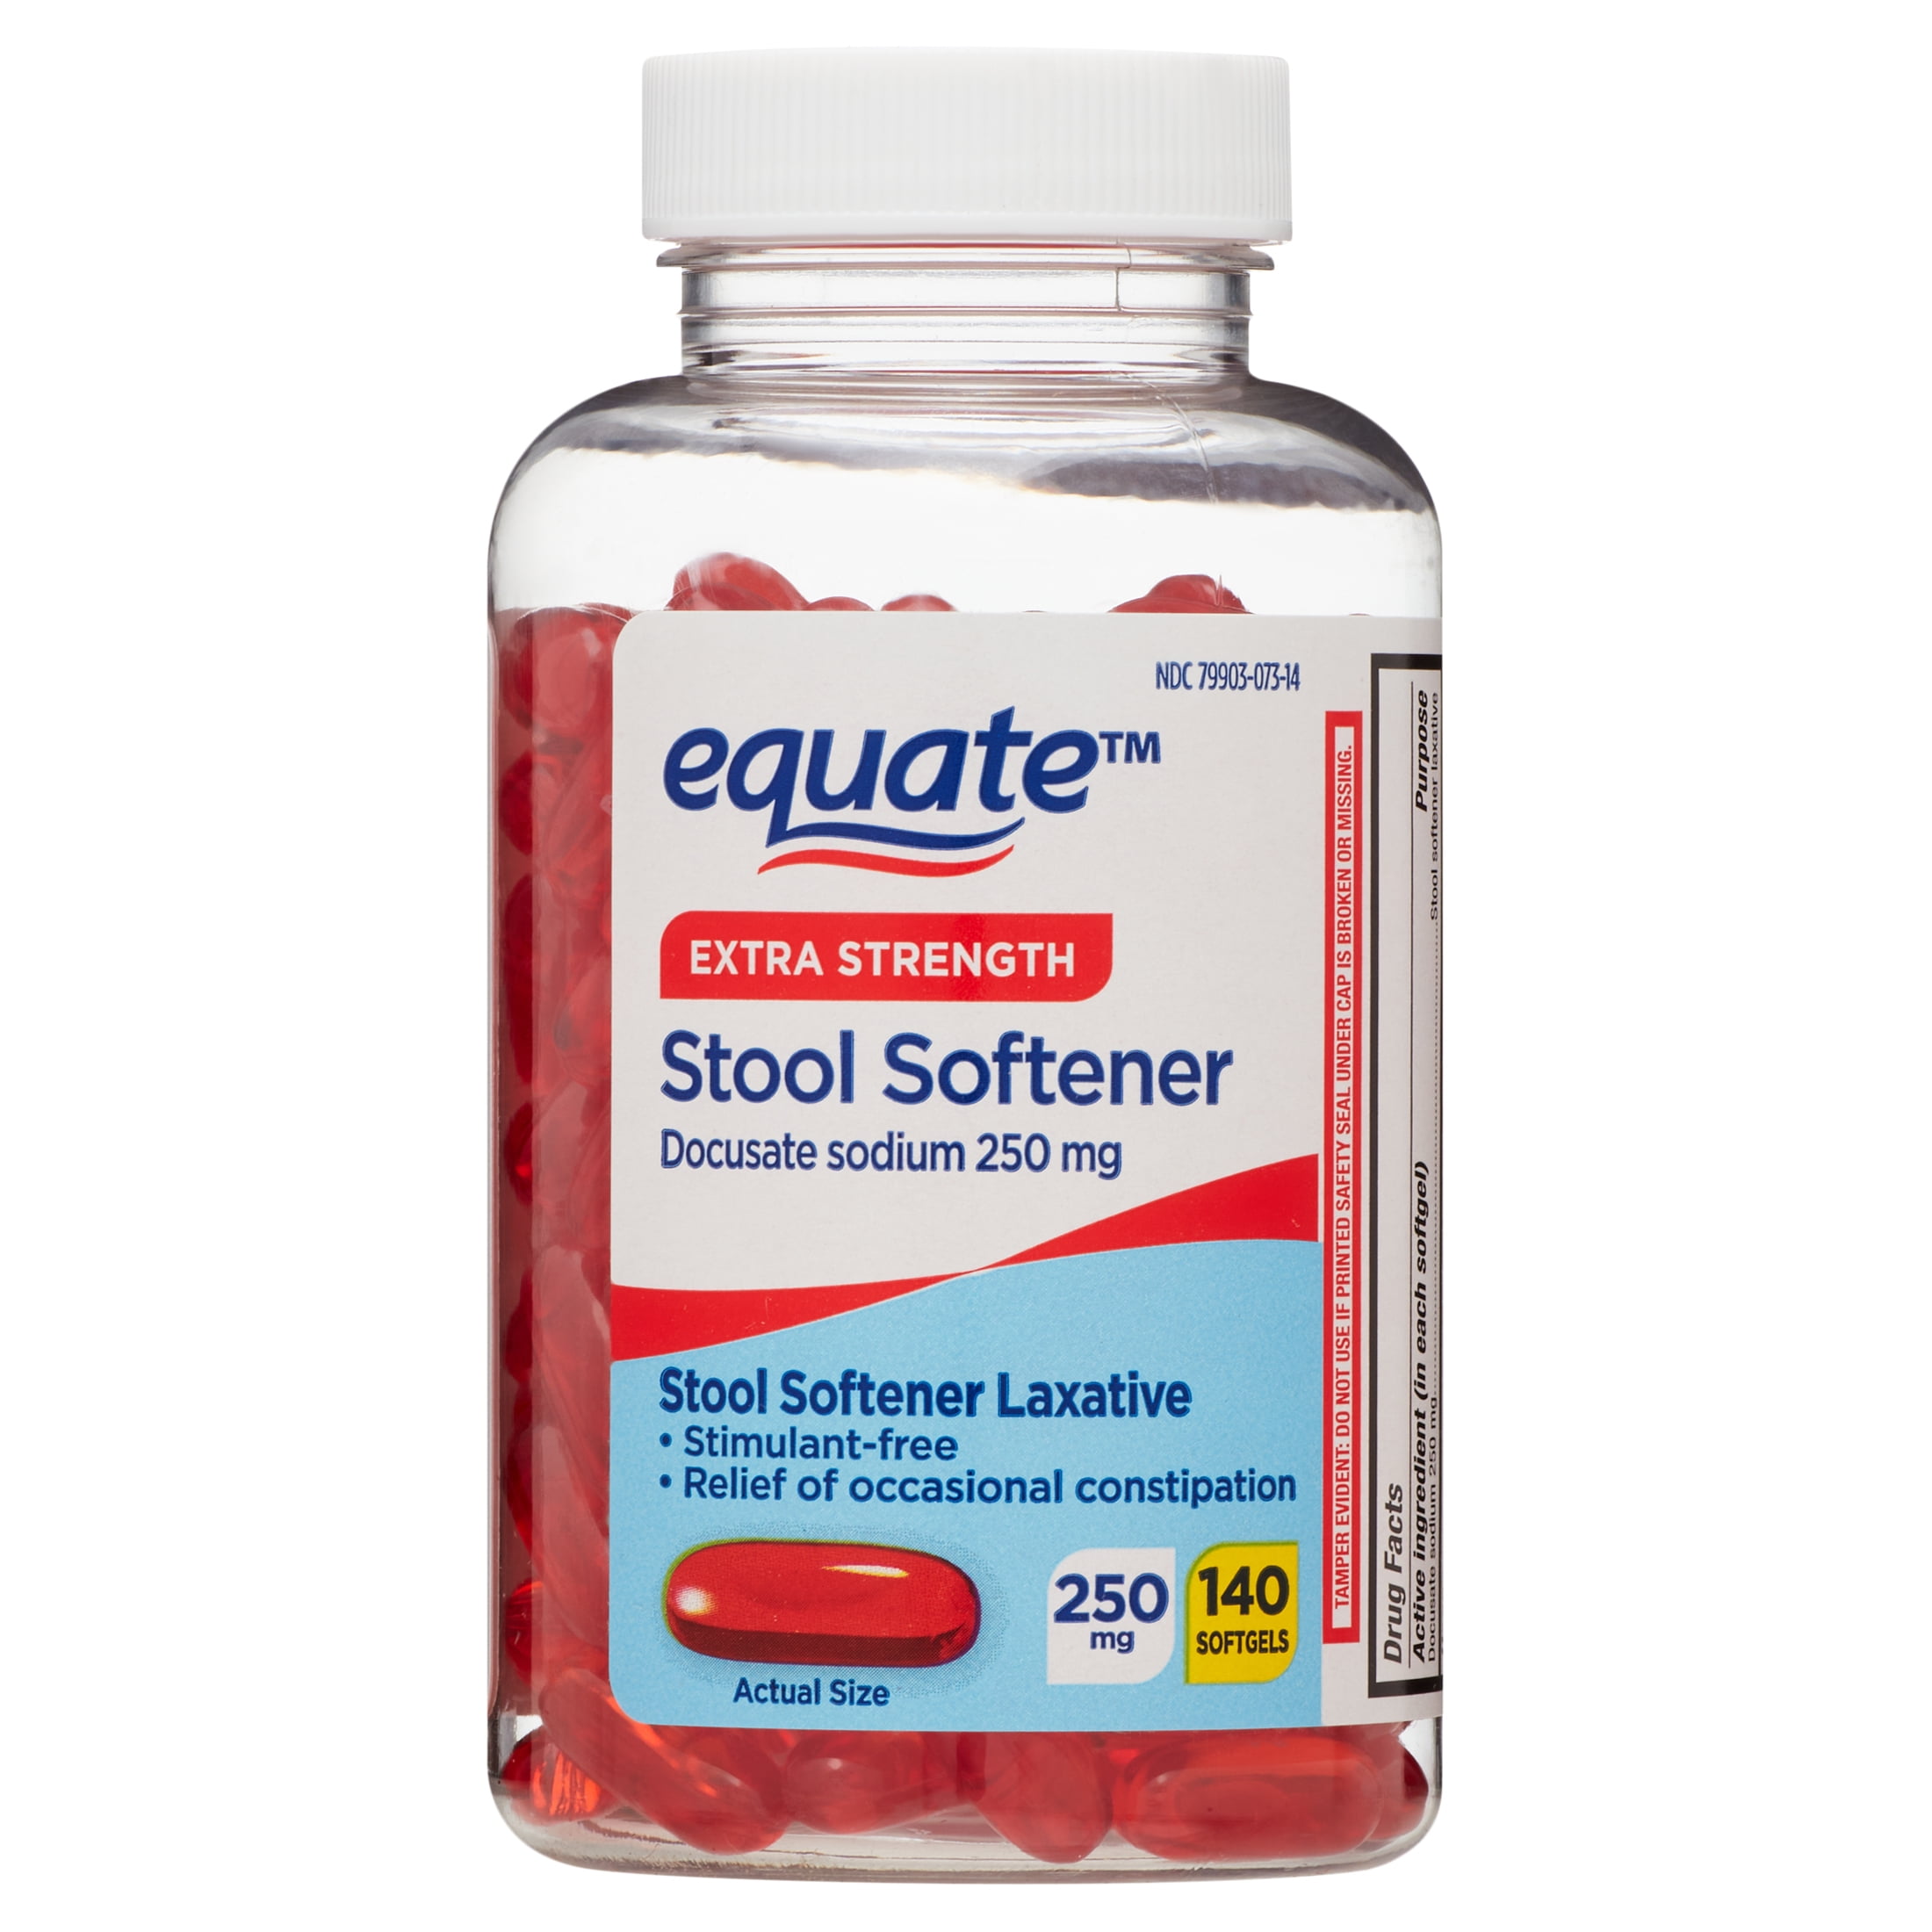 Equate Extra Strength Stool Softener Softgels for Constipation, 250 mg, 140 Count